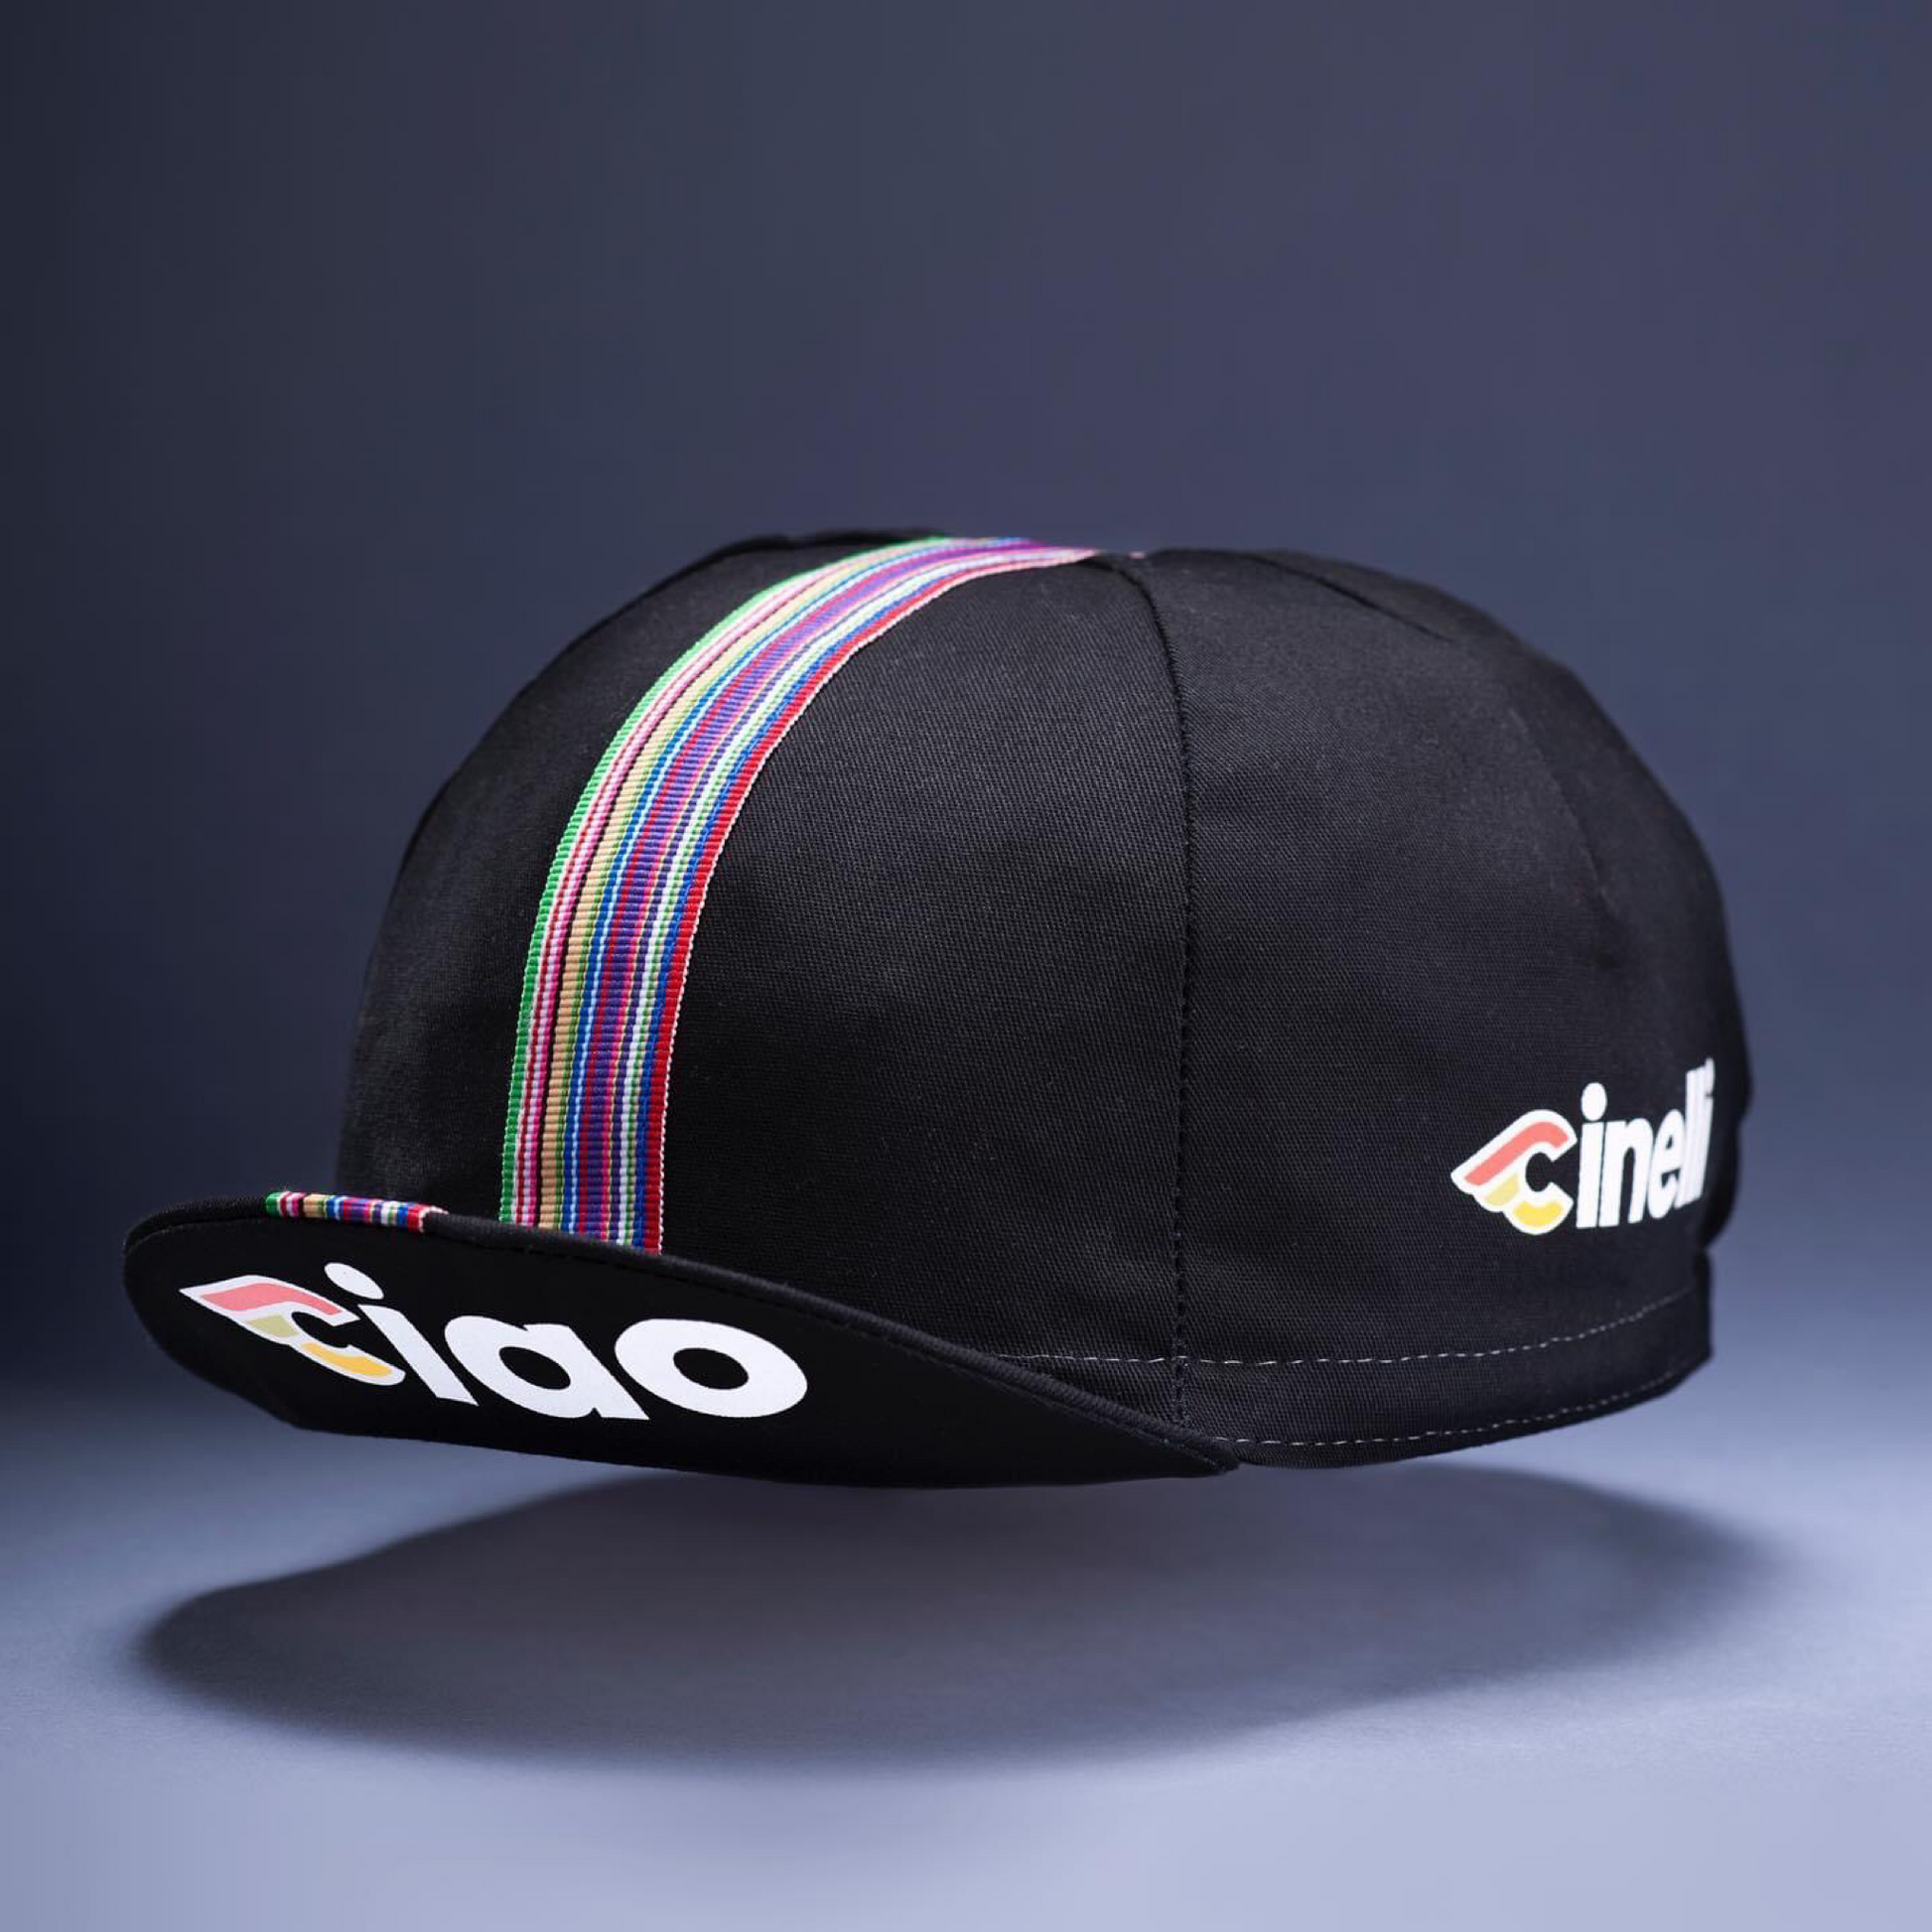 Cinelli Ciao Black Cap by Ascender Cycling Club Switzerland Front Side View